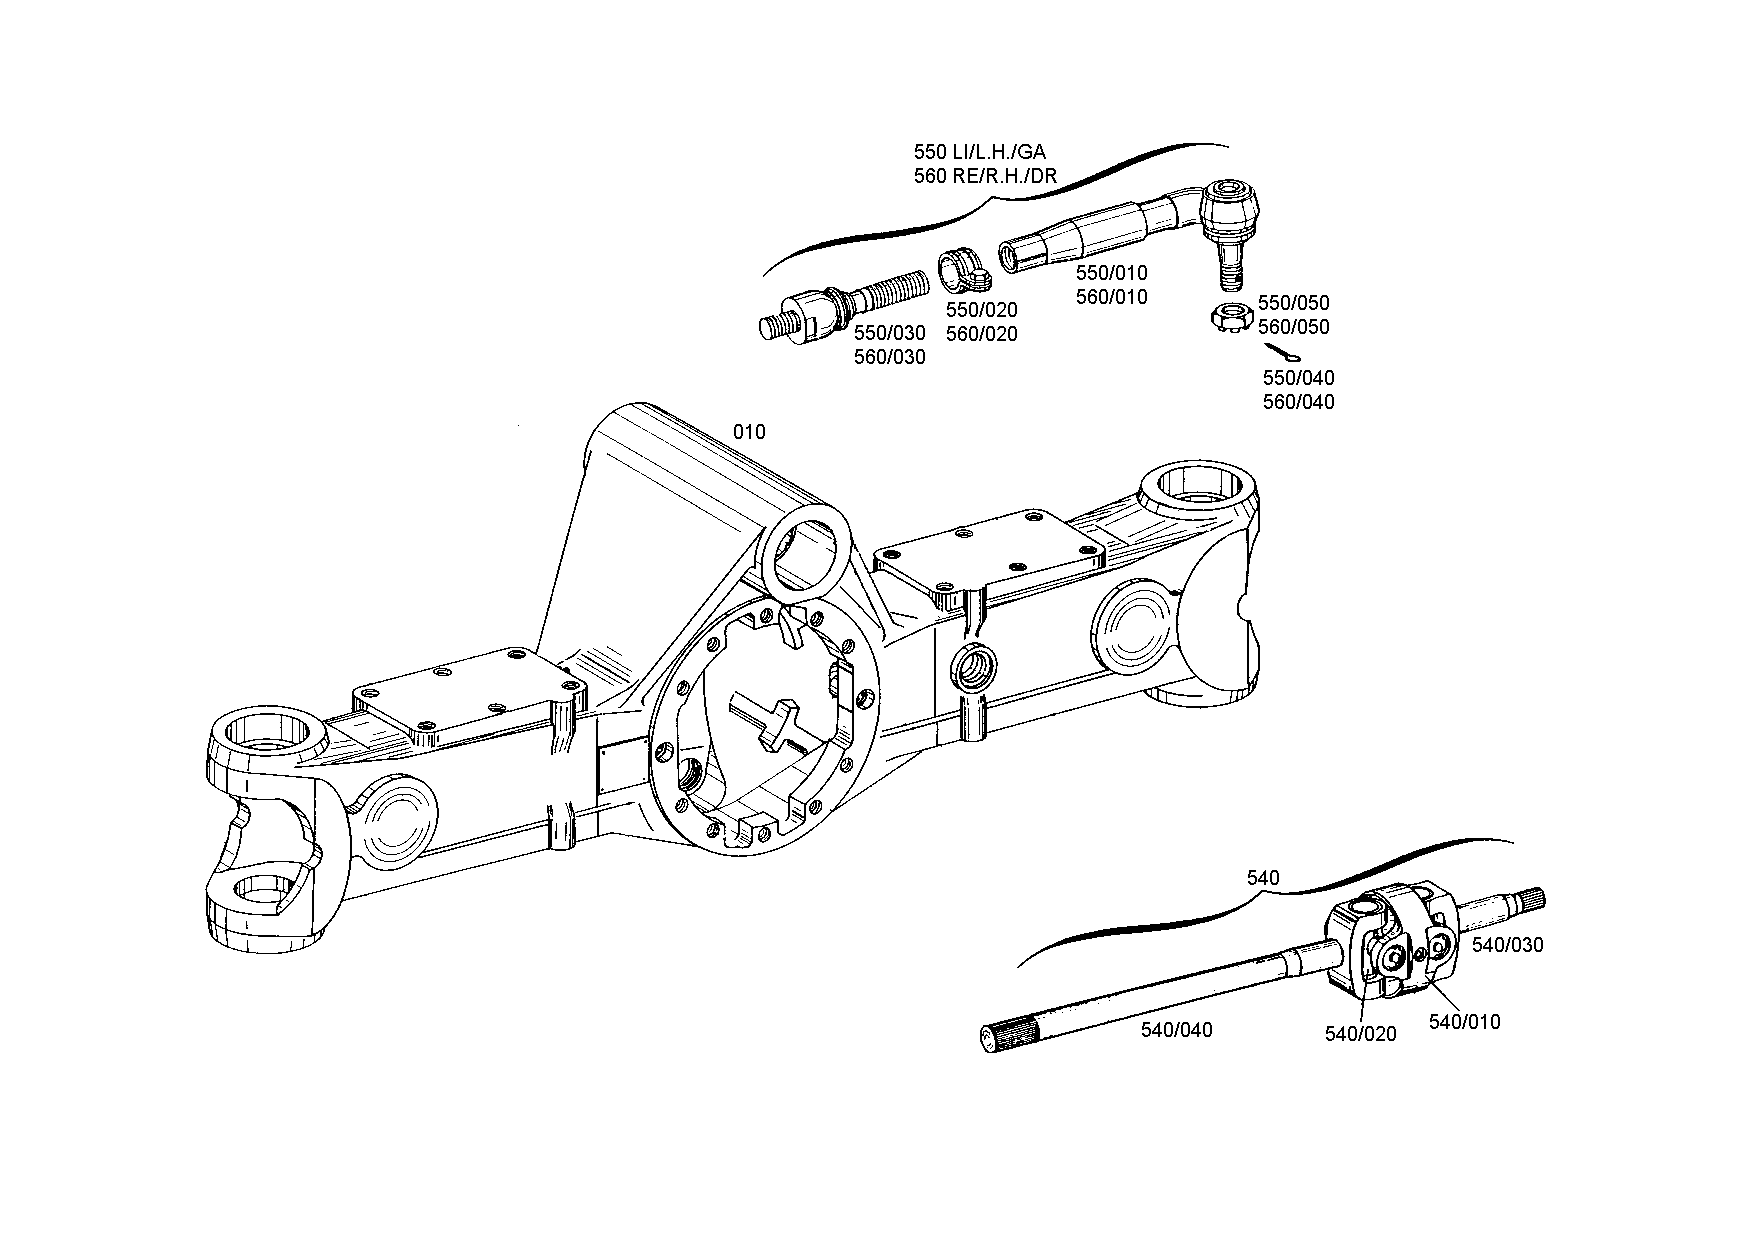 drawing for LIEBHERR GMBH 10216559 - TIE ROD (figure 1)